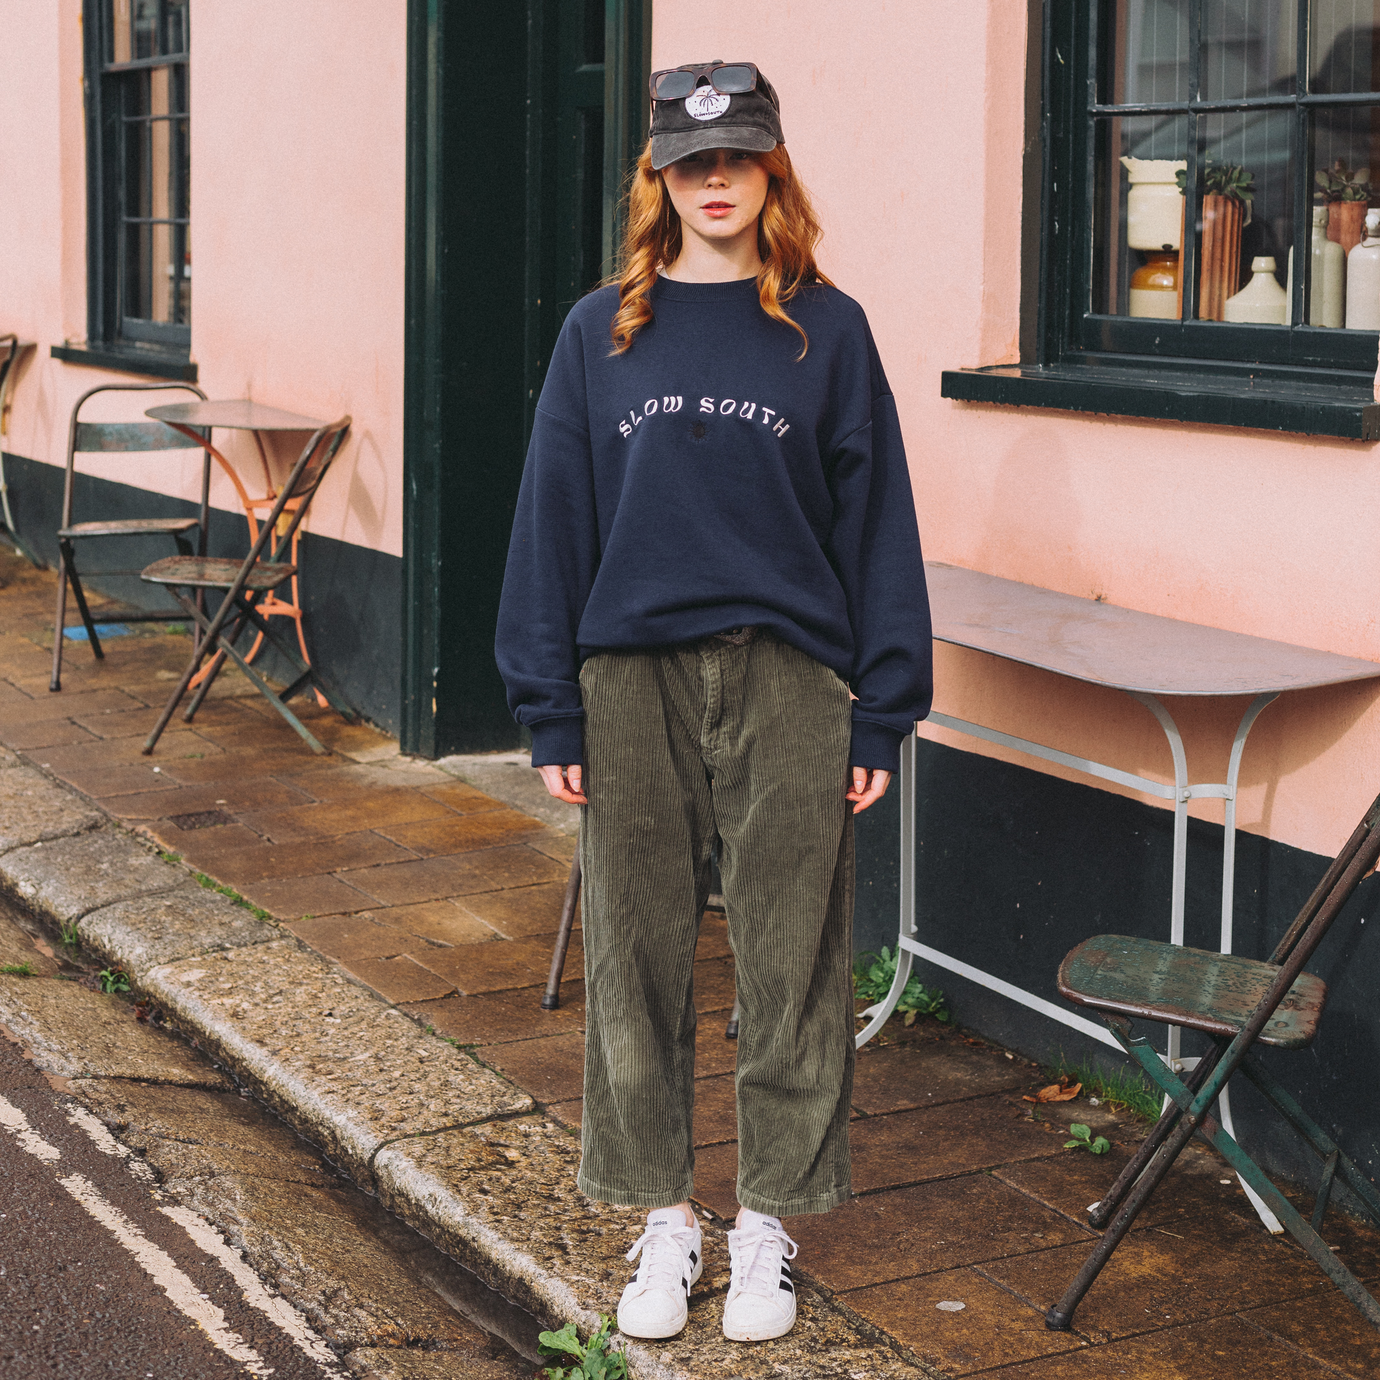 Slow South Arch Embroidered Oversized Sweatshirt - Navy